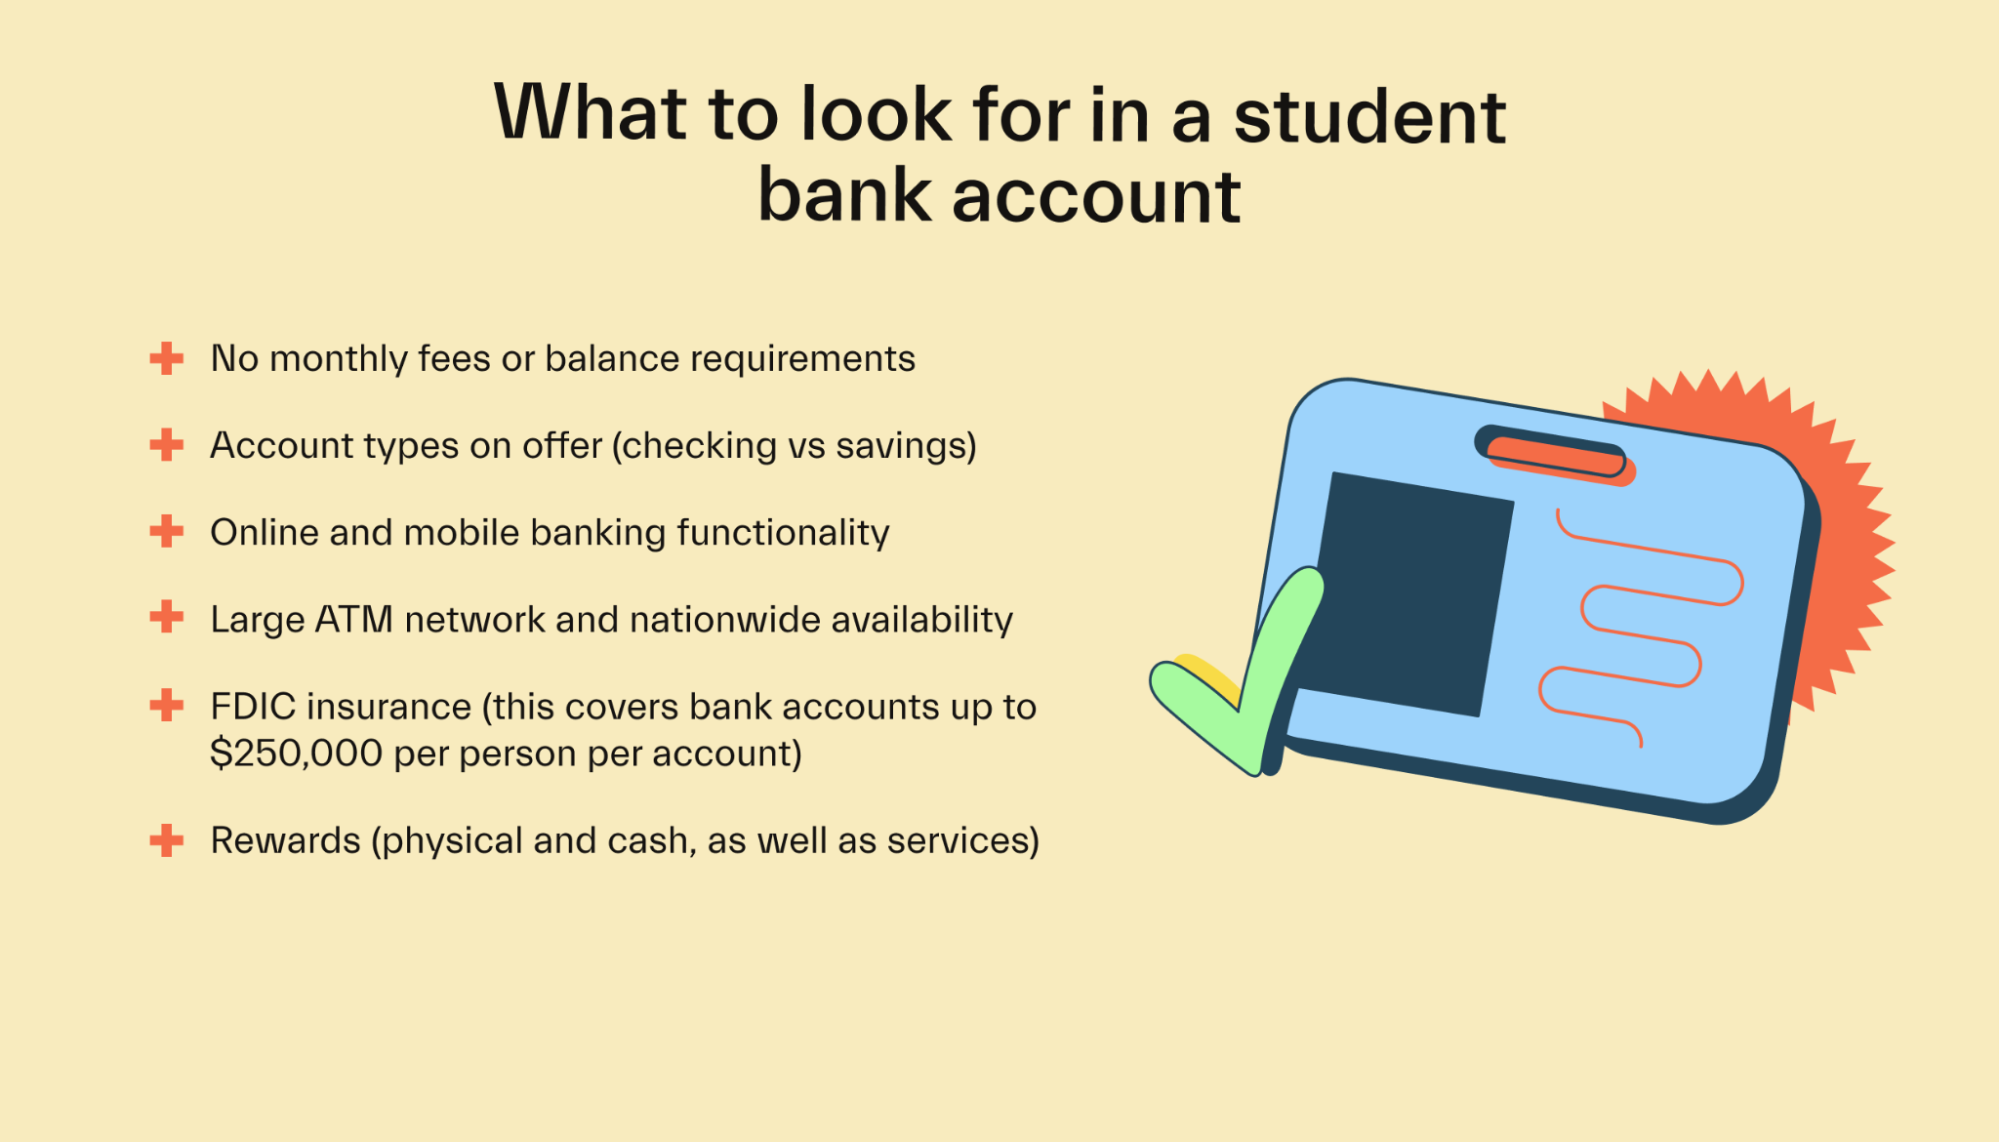 What to look for in a student bank account